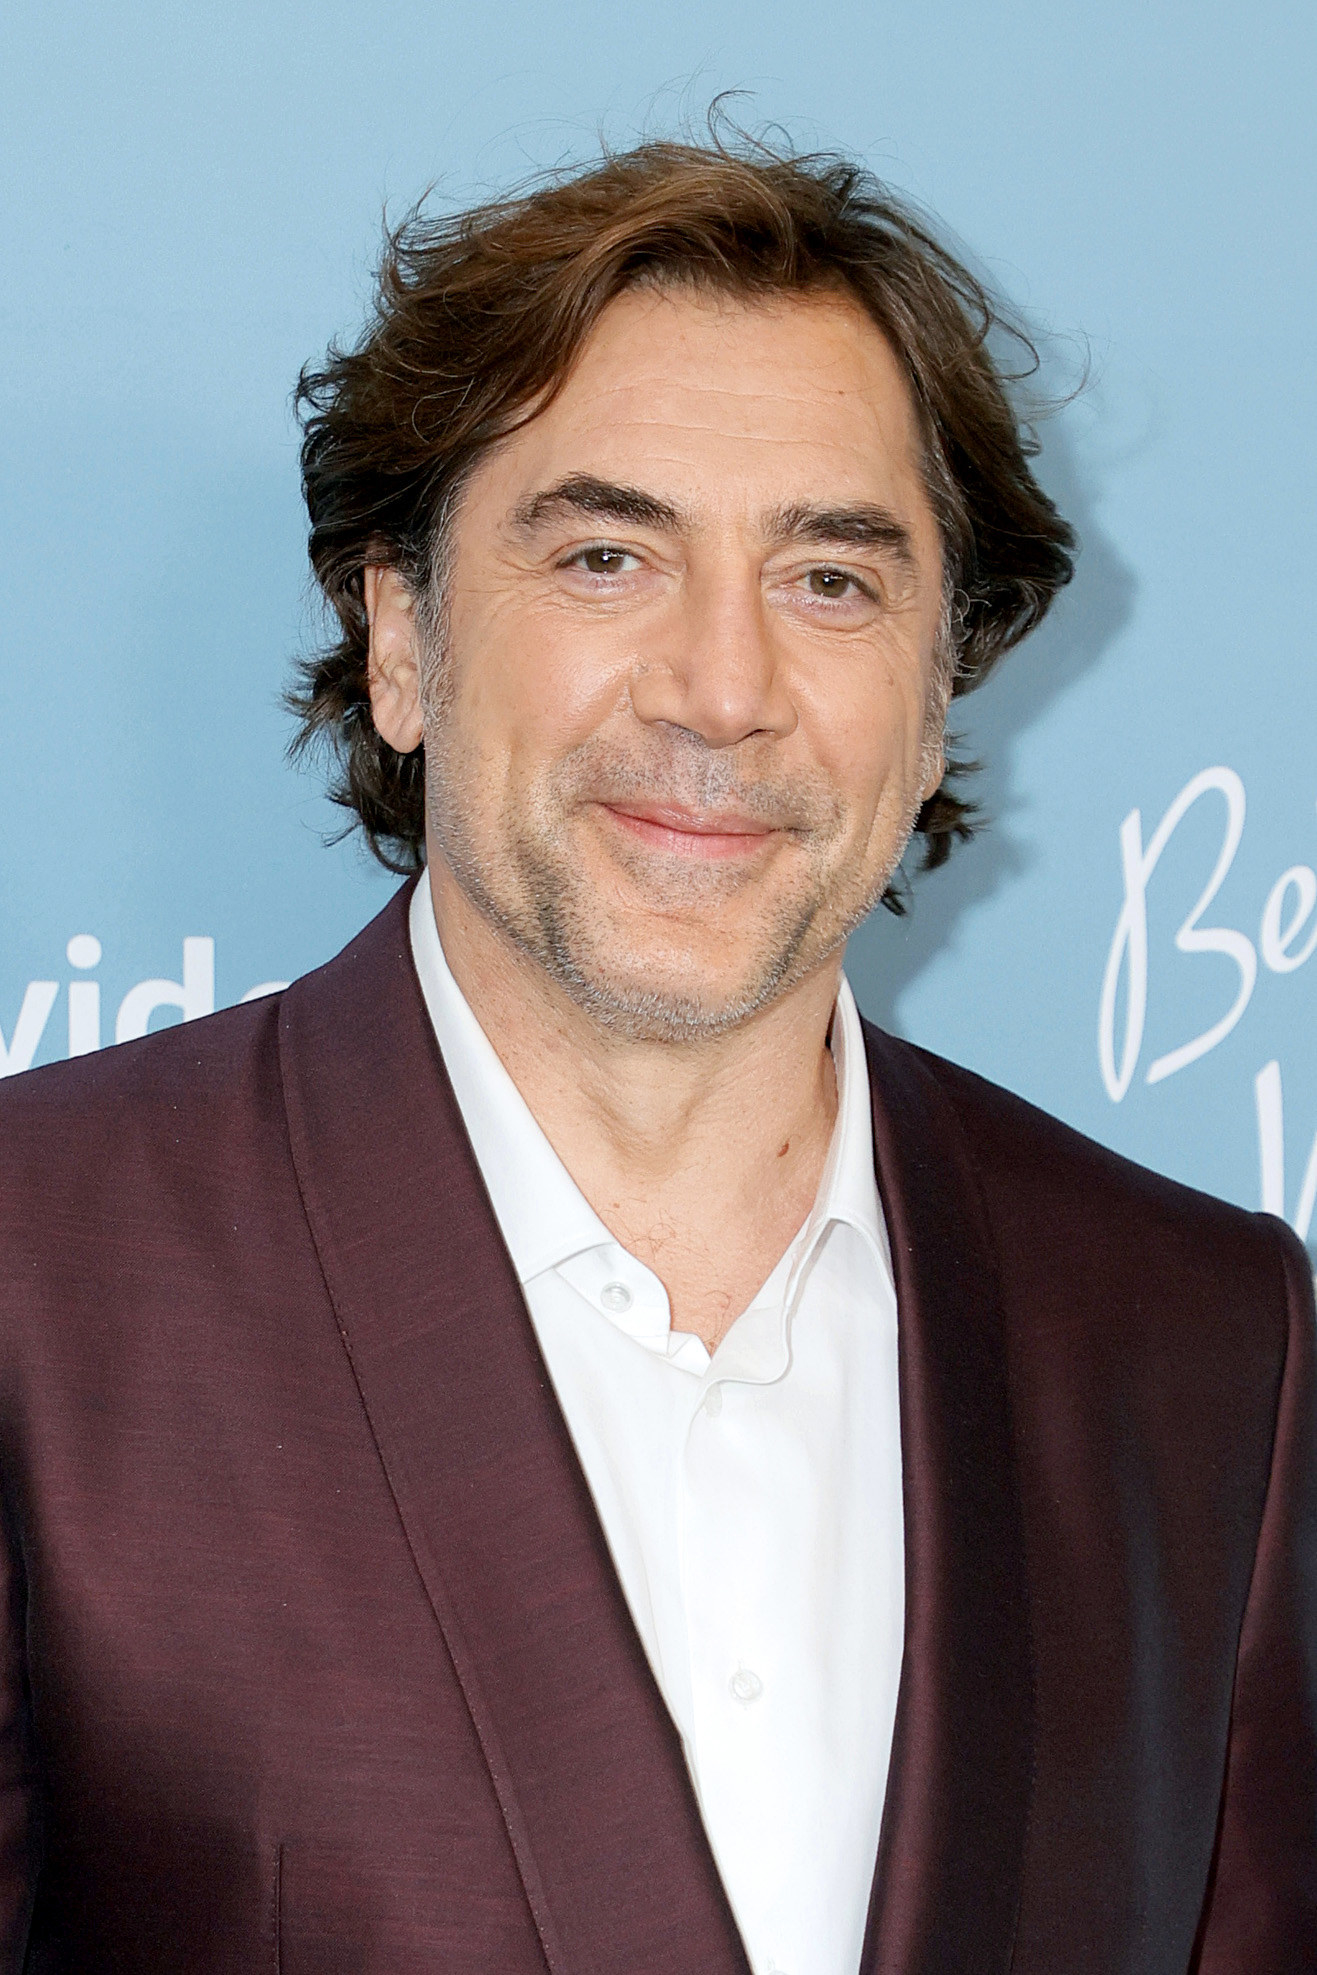 Javier Bardem attending a movie premiere in a suit